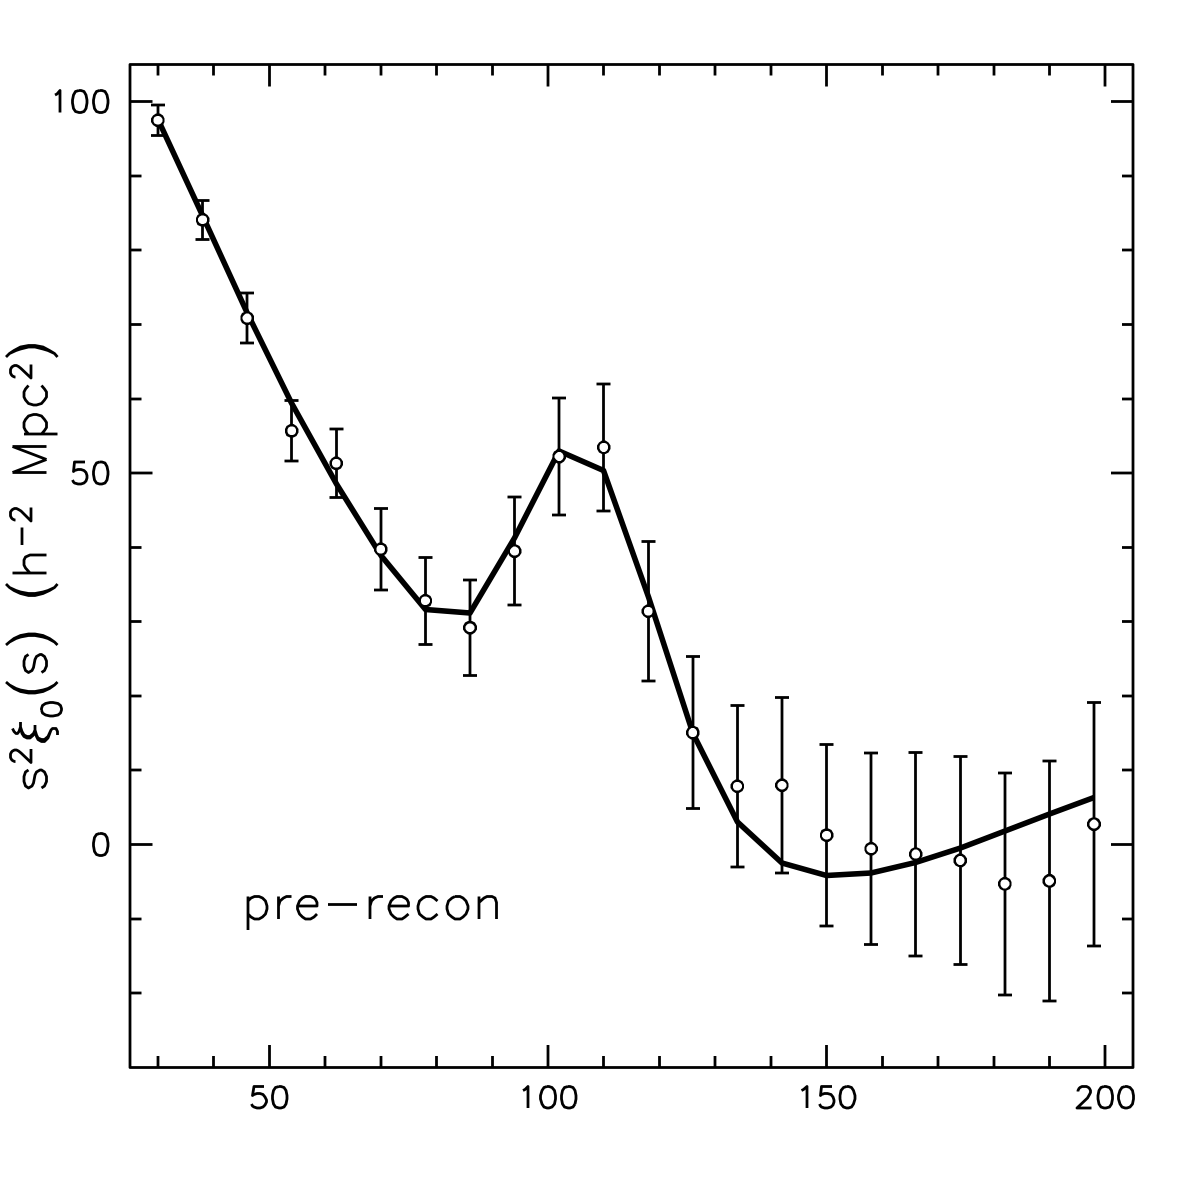 DR11 CMASS pre-reconstruction correlation function